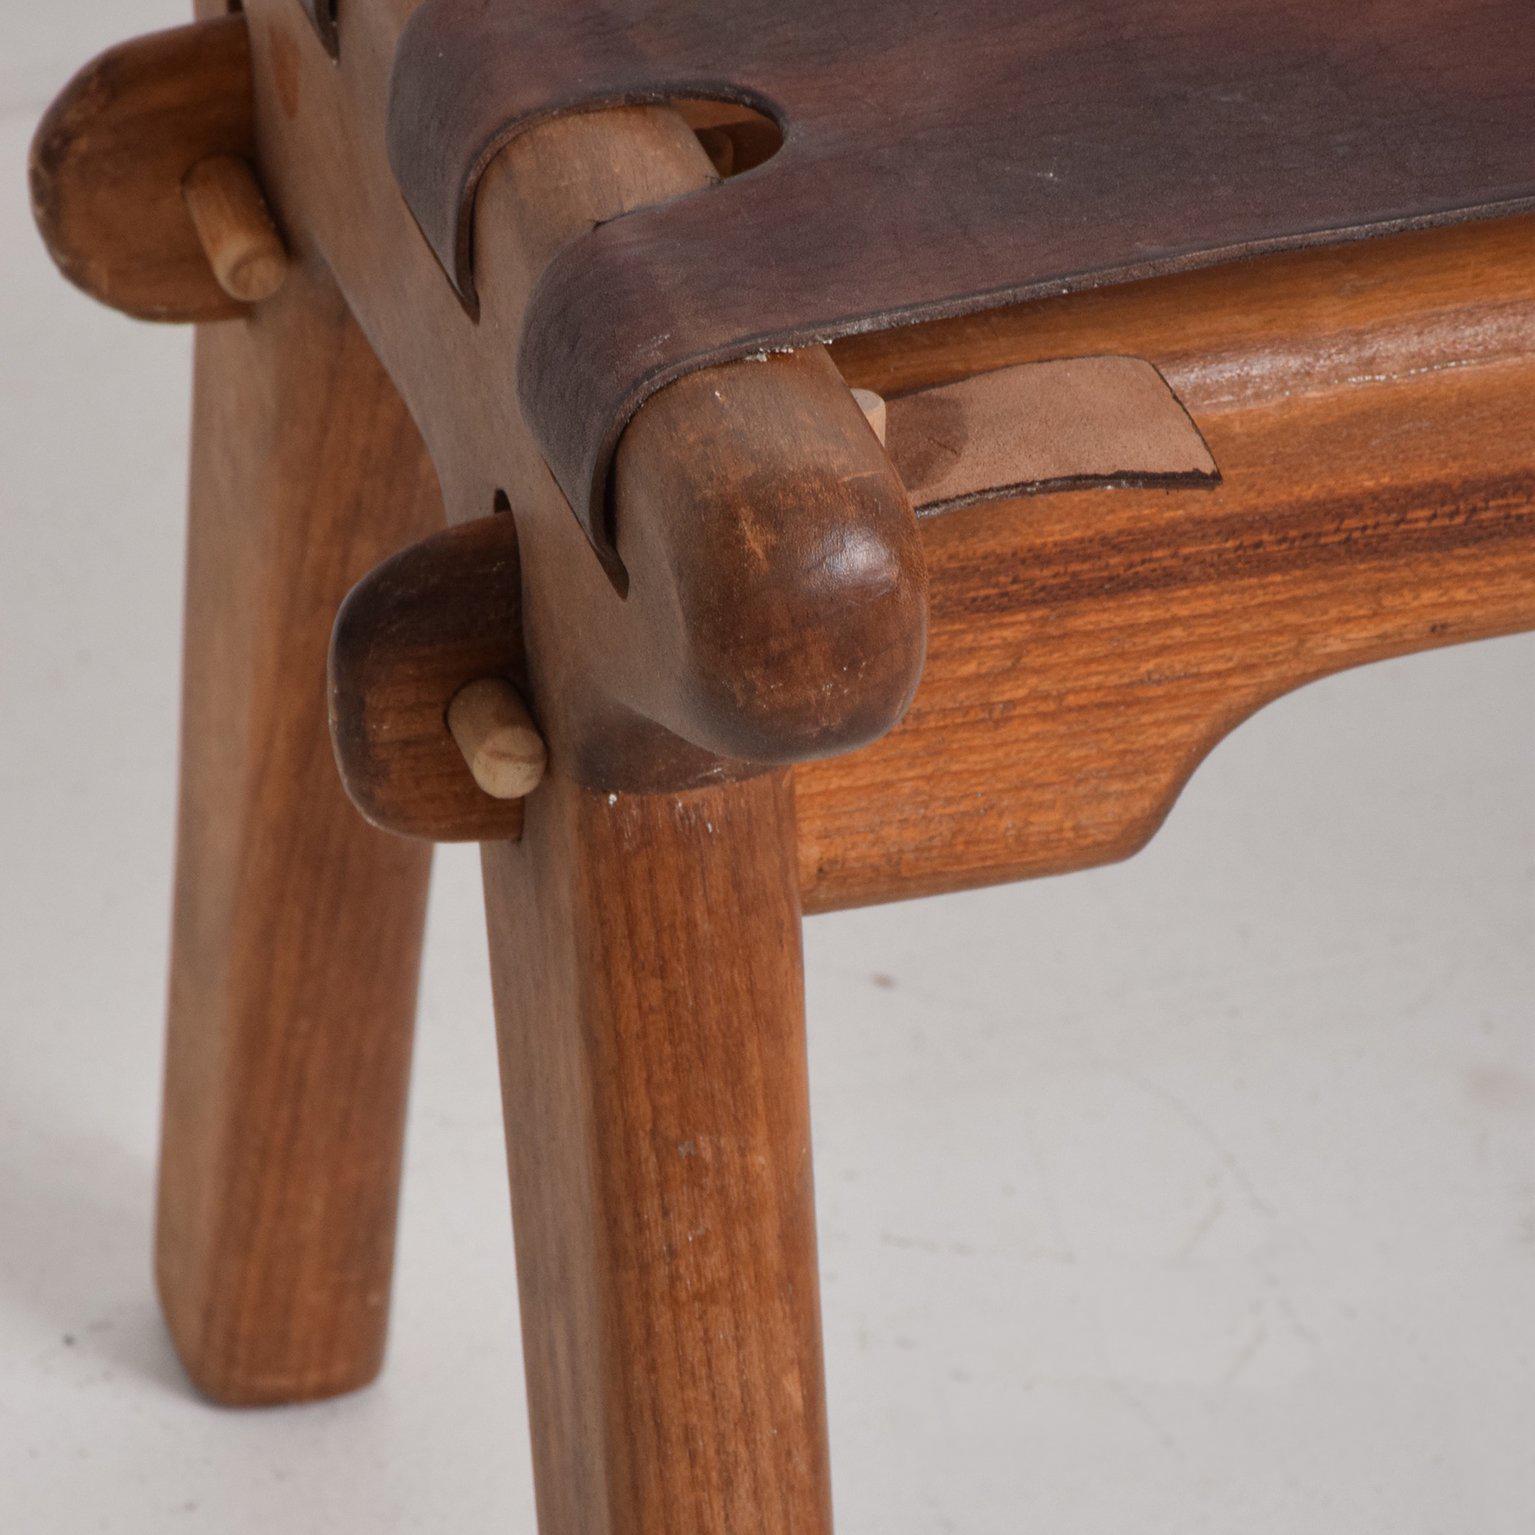 For your consideration a vintage stool with table by Angel Pazmino. 

Saddle leather with solid wood. 
19